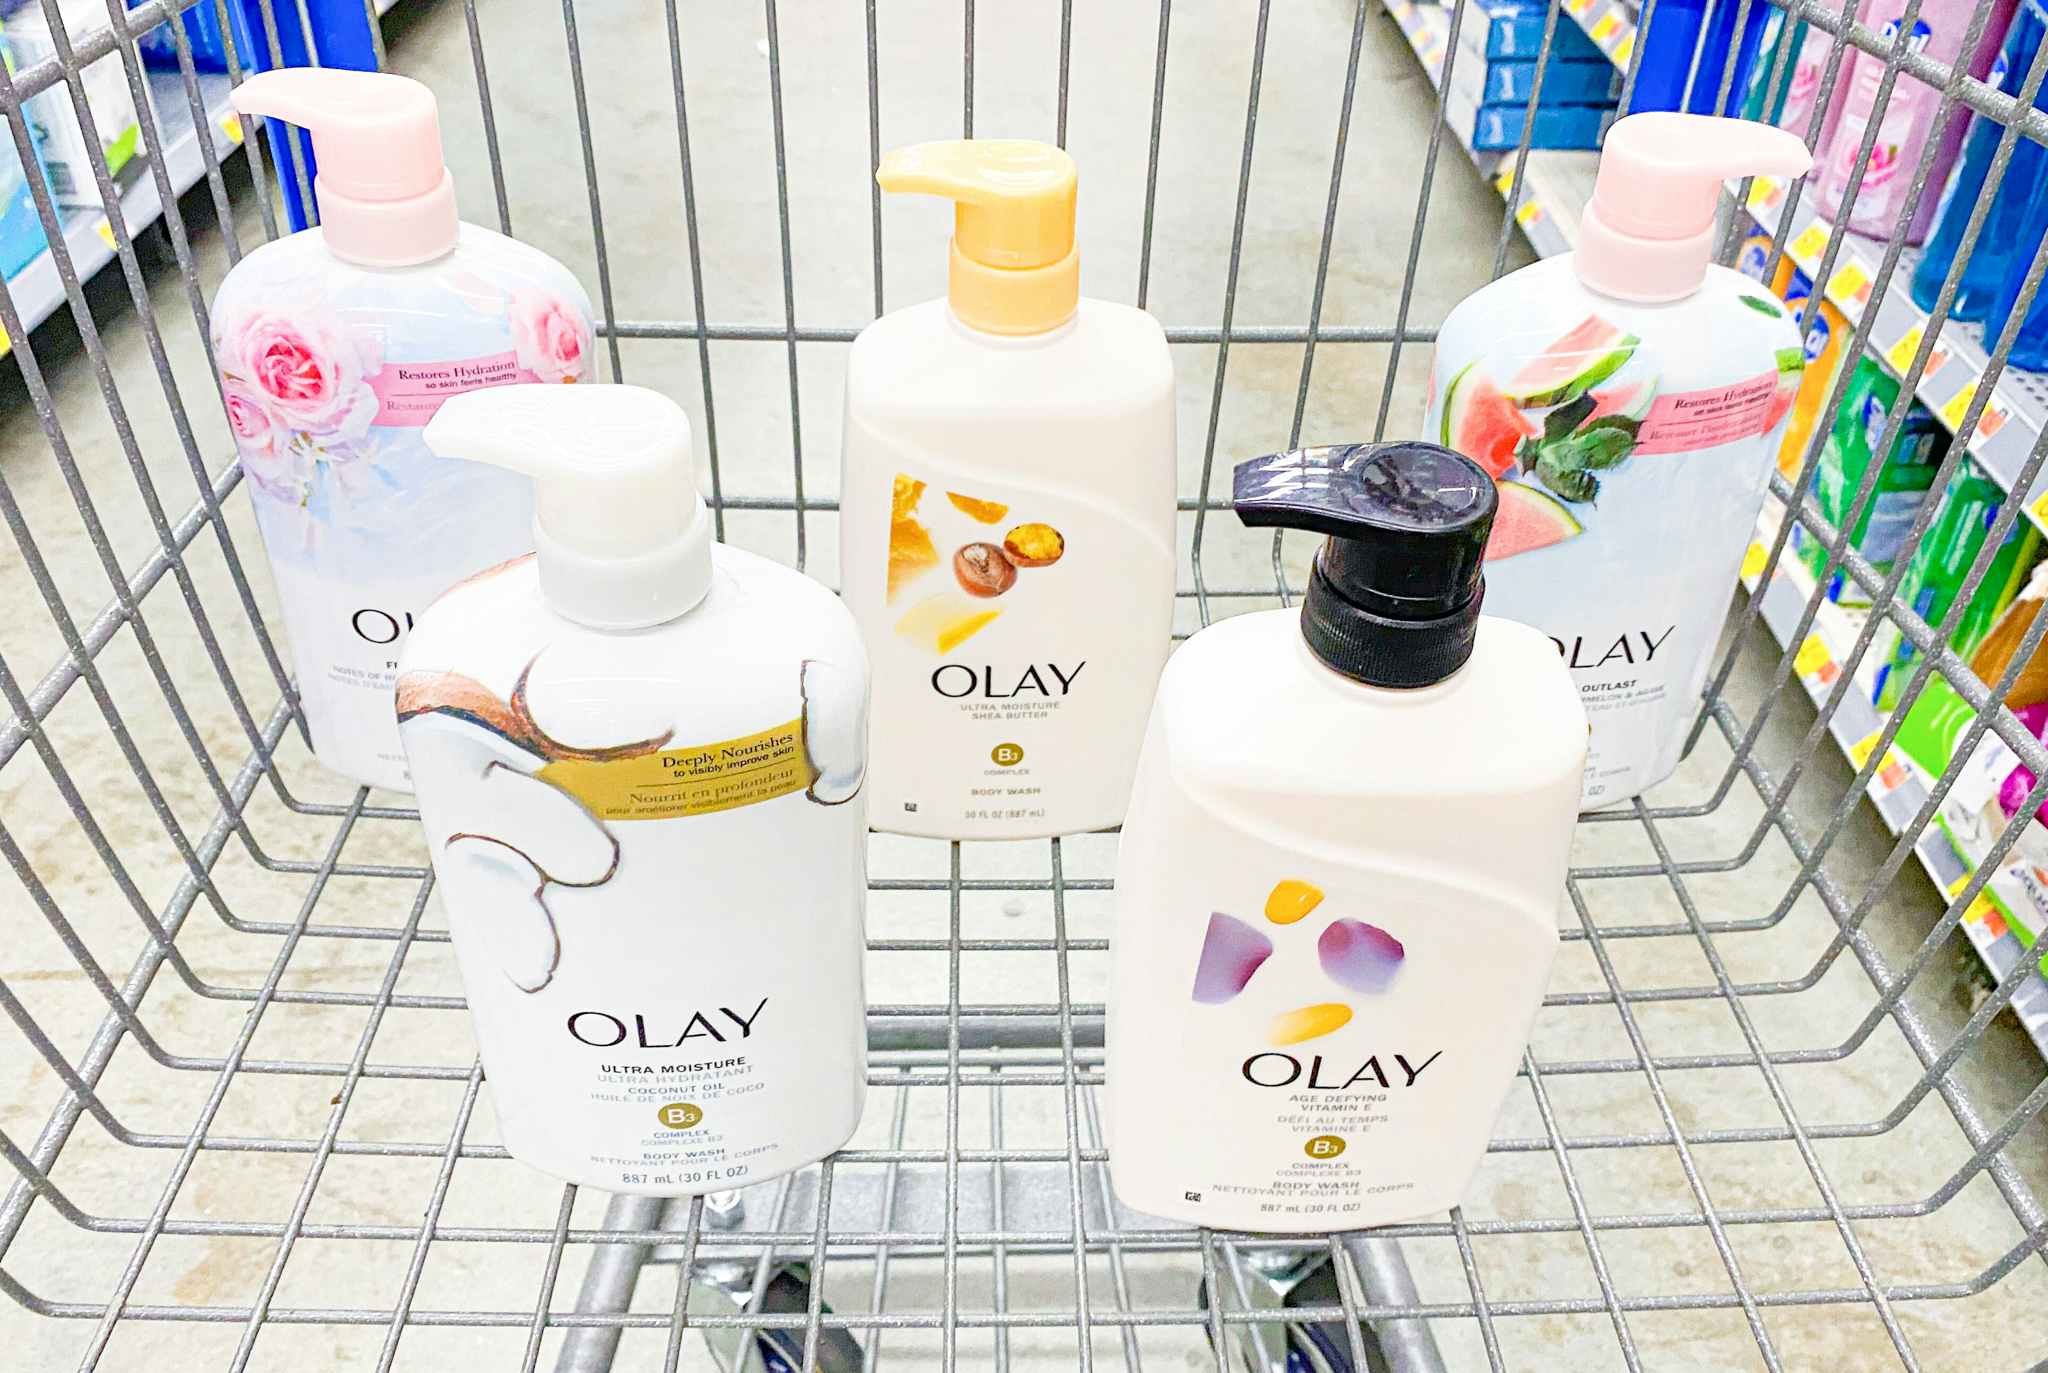 Olay Body Wash products in Walmart shopping cart